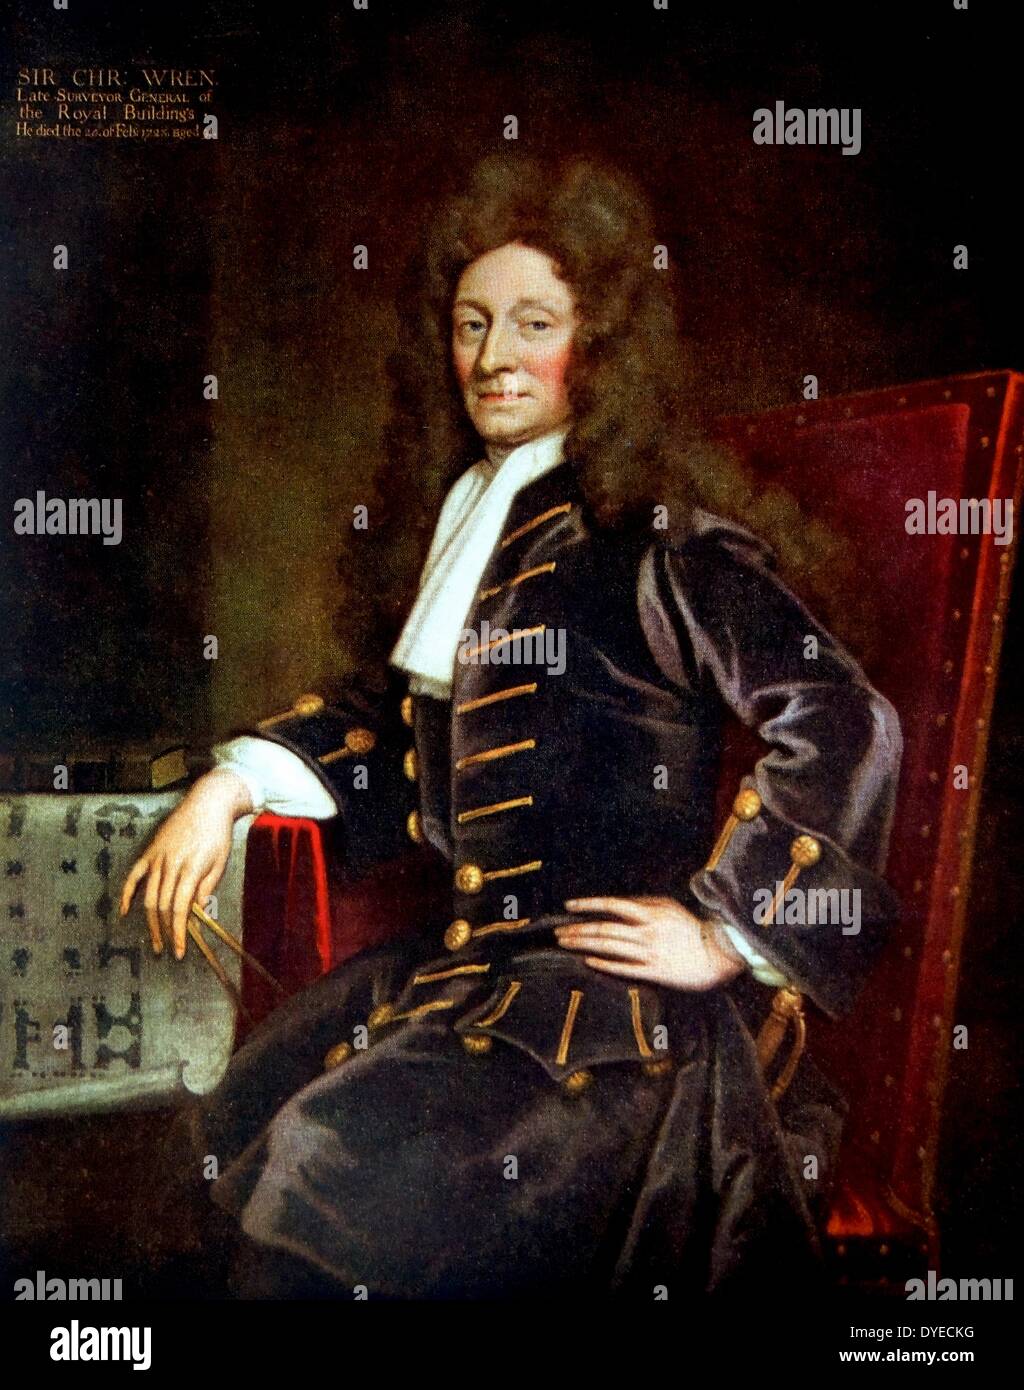 Portrait of Sir Christopher Wren (1632 - 1723) English architect seen in this portrait with some blueprints and a measurement tools. By Sir Godfrey Kneller (1646 - 1723) The leading portrait painter in England during the late 17th Century. Dated 17th Century Stock Photo